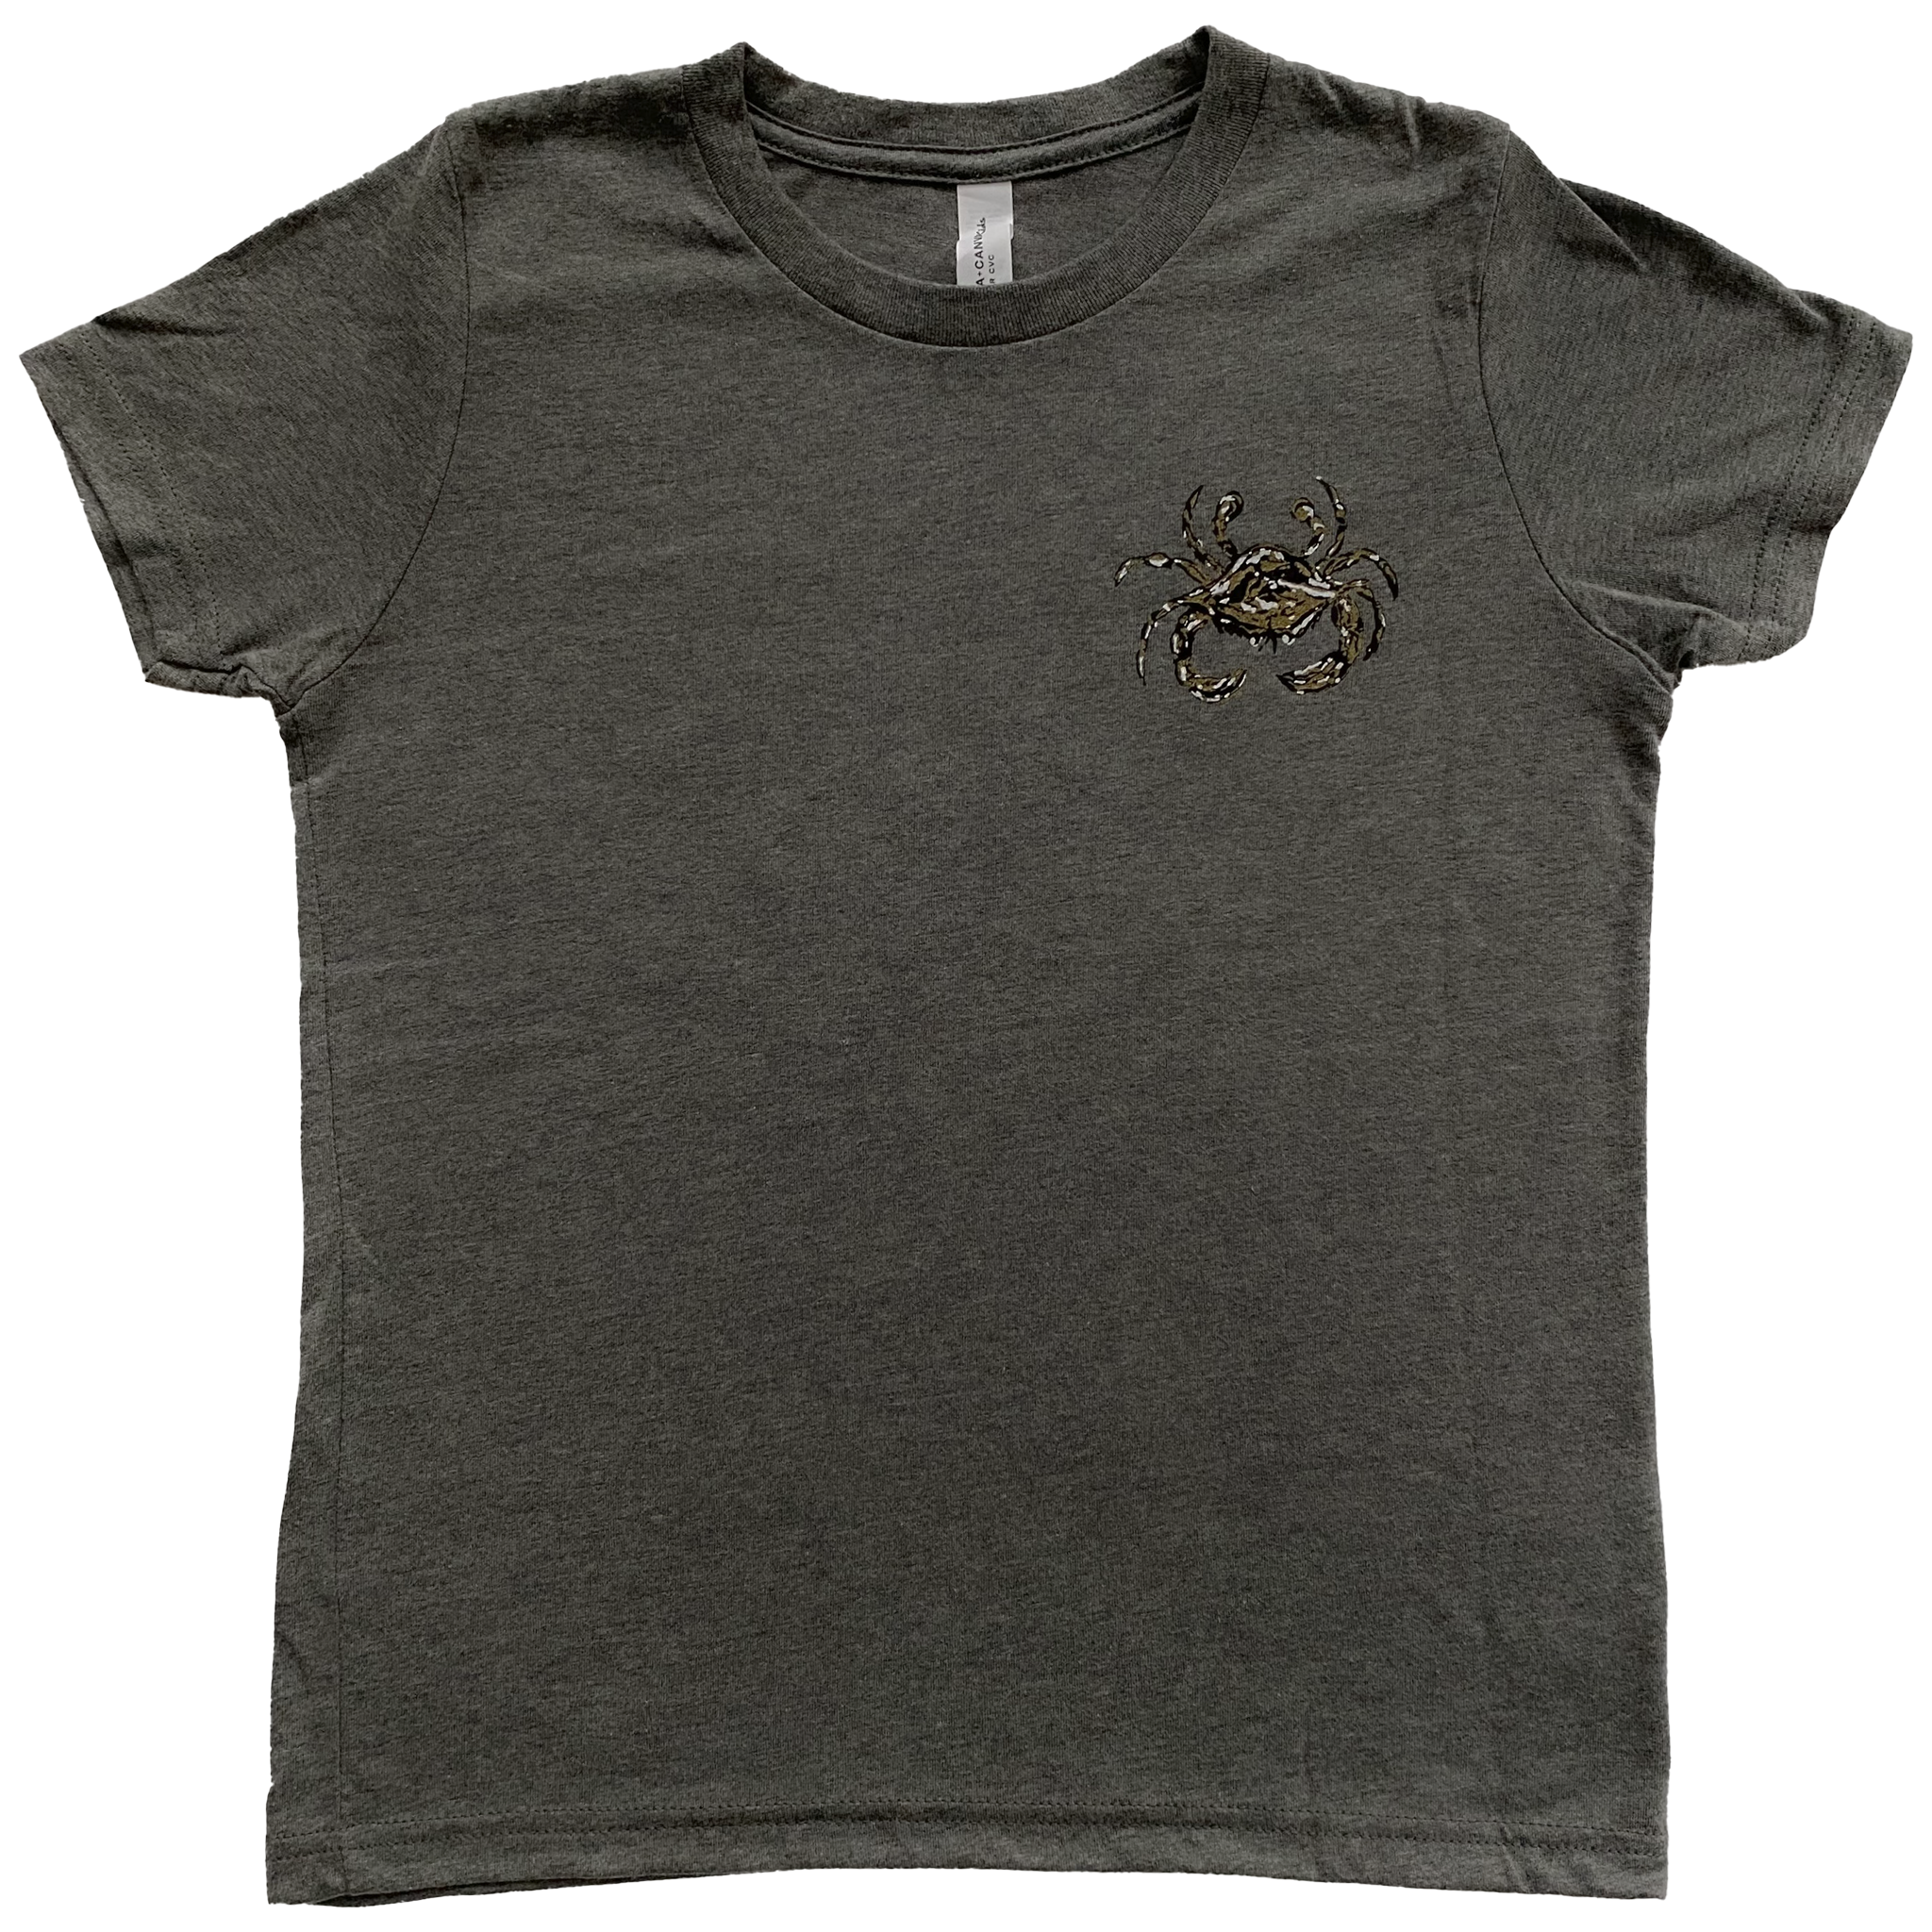 A heather gray youth short sleeve t-shirt with a black, gold, and white crab on the left chest.